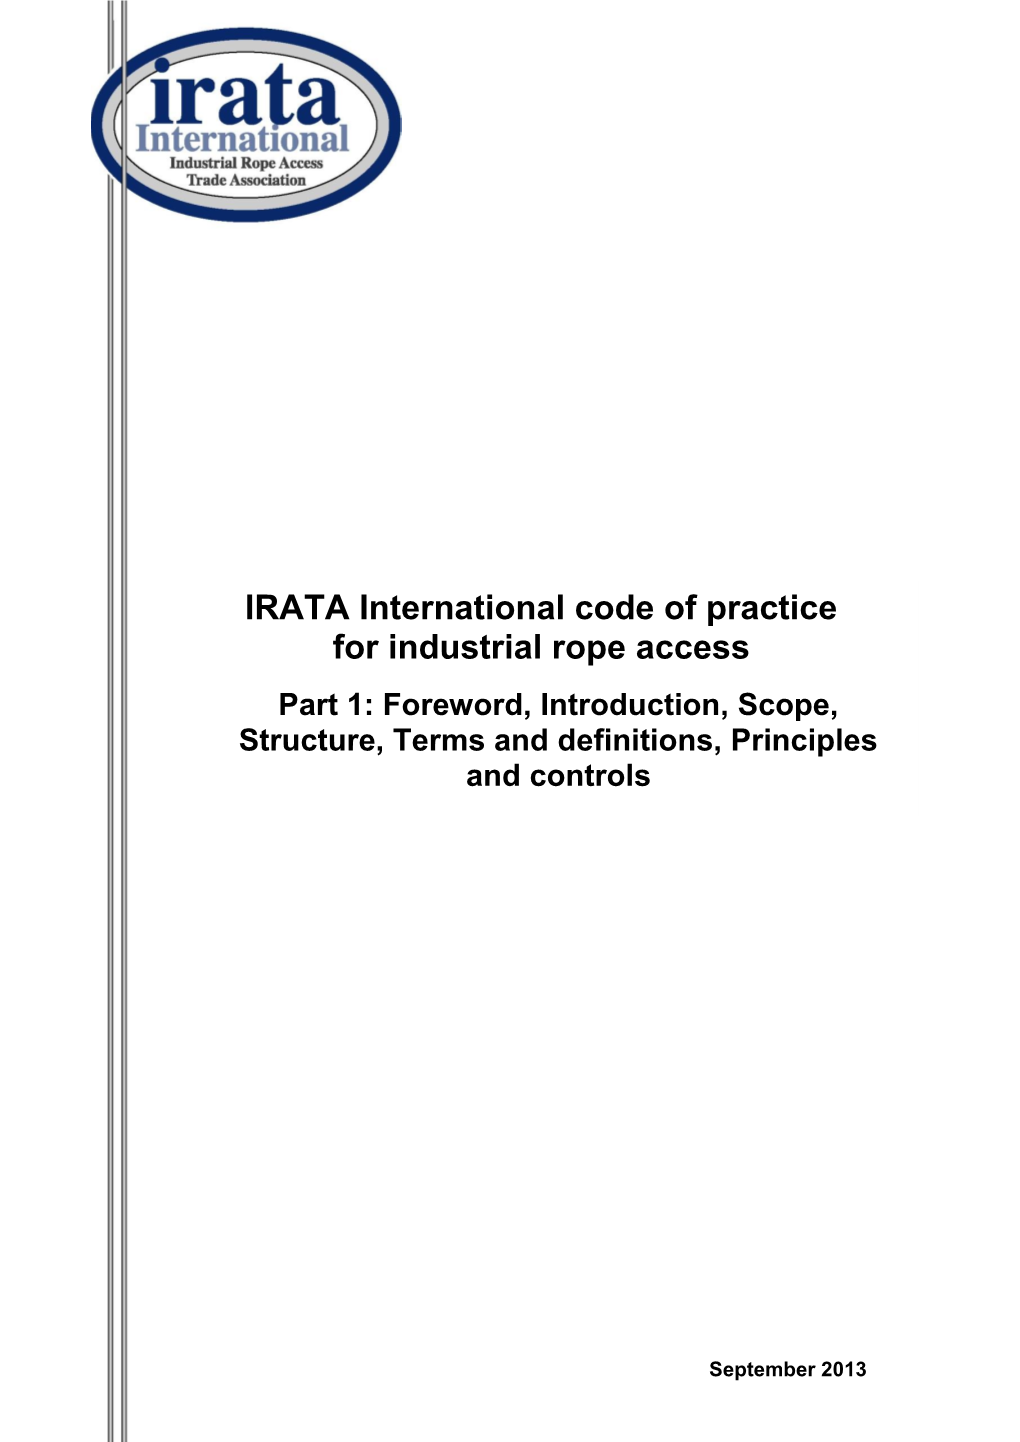 IRATA International Code of Practice for Industrial Rope Access